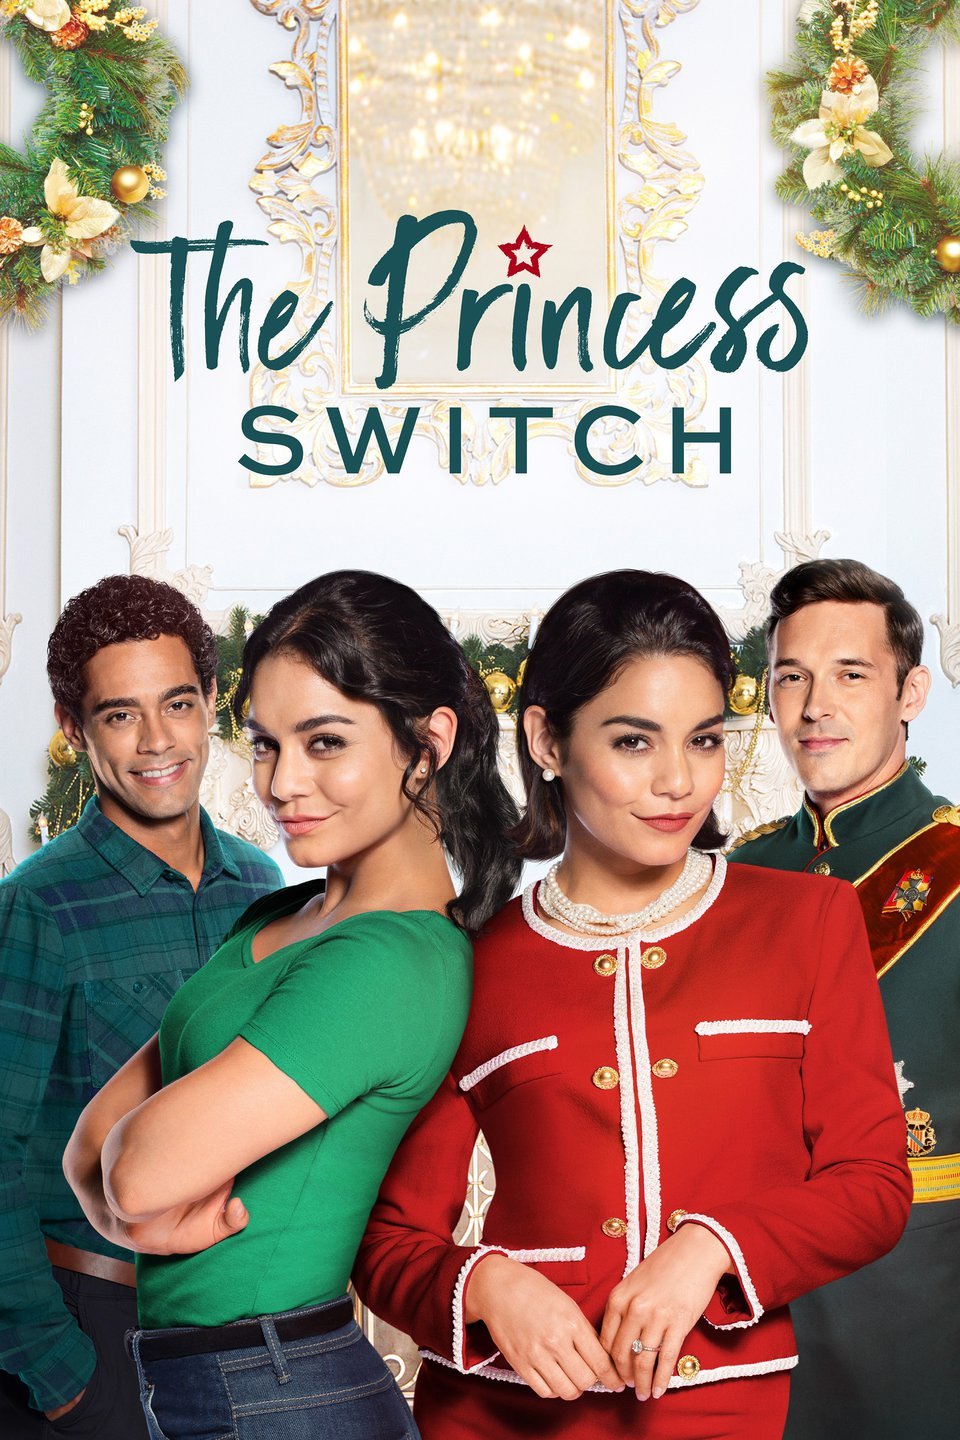 Princess switches movie with twins